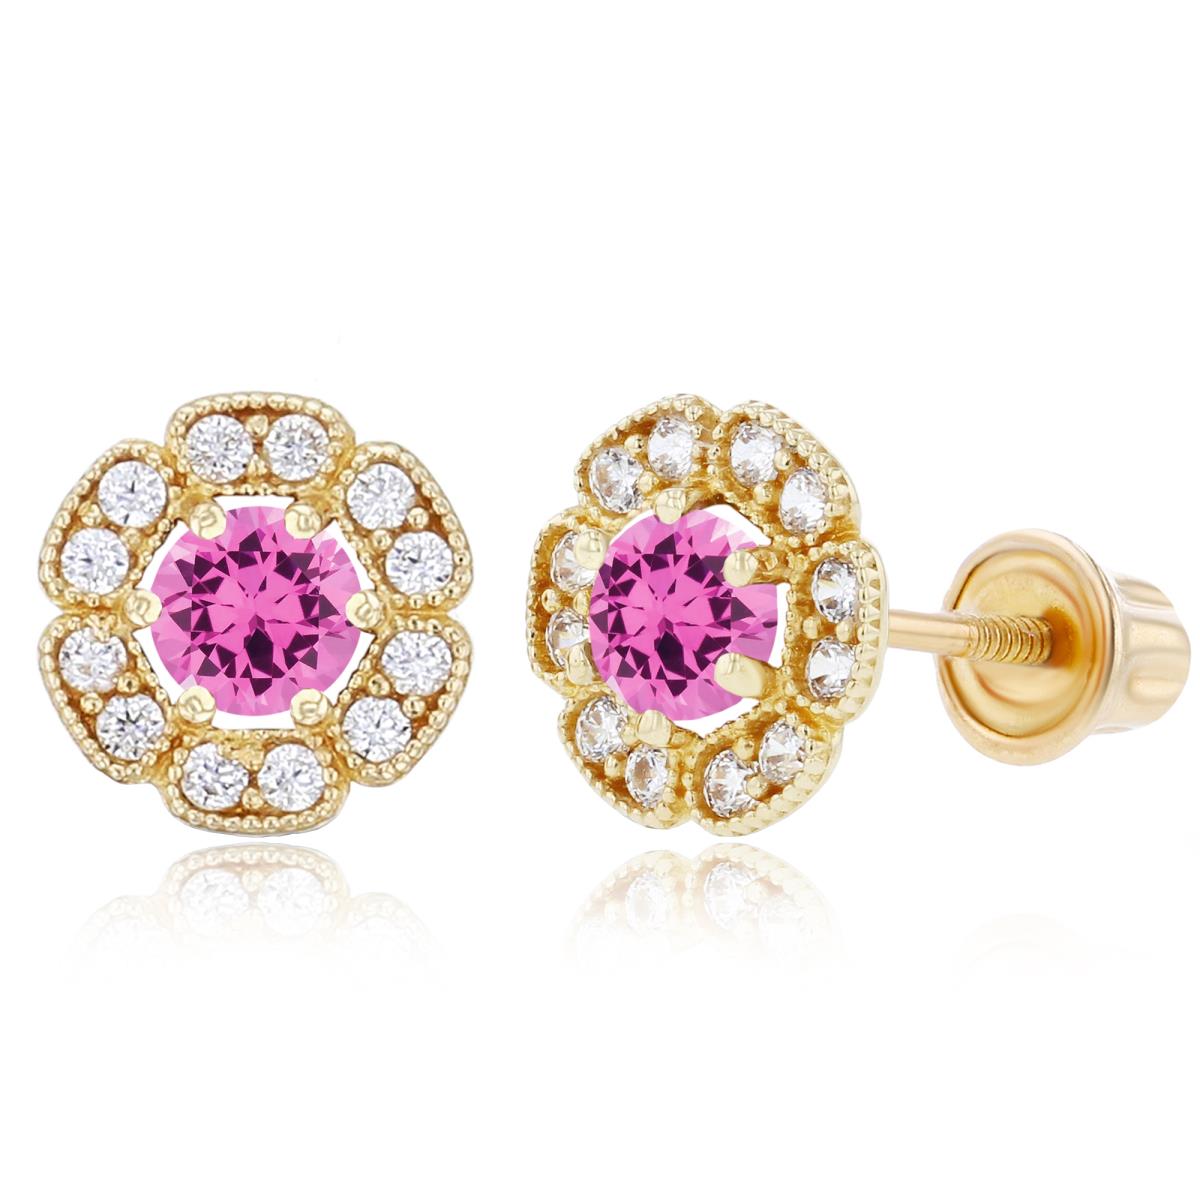 14K Yellow Gold 3mm Created Pink Sapphire & 1mm Created White Sapphire Flower Screwback Earrings